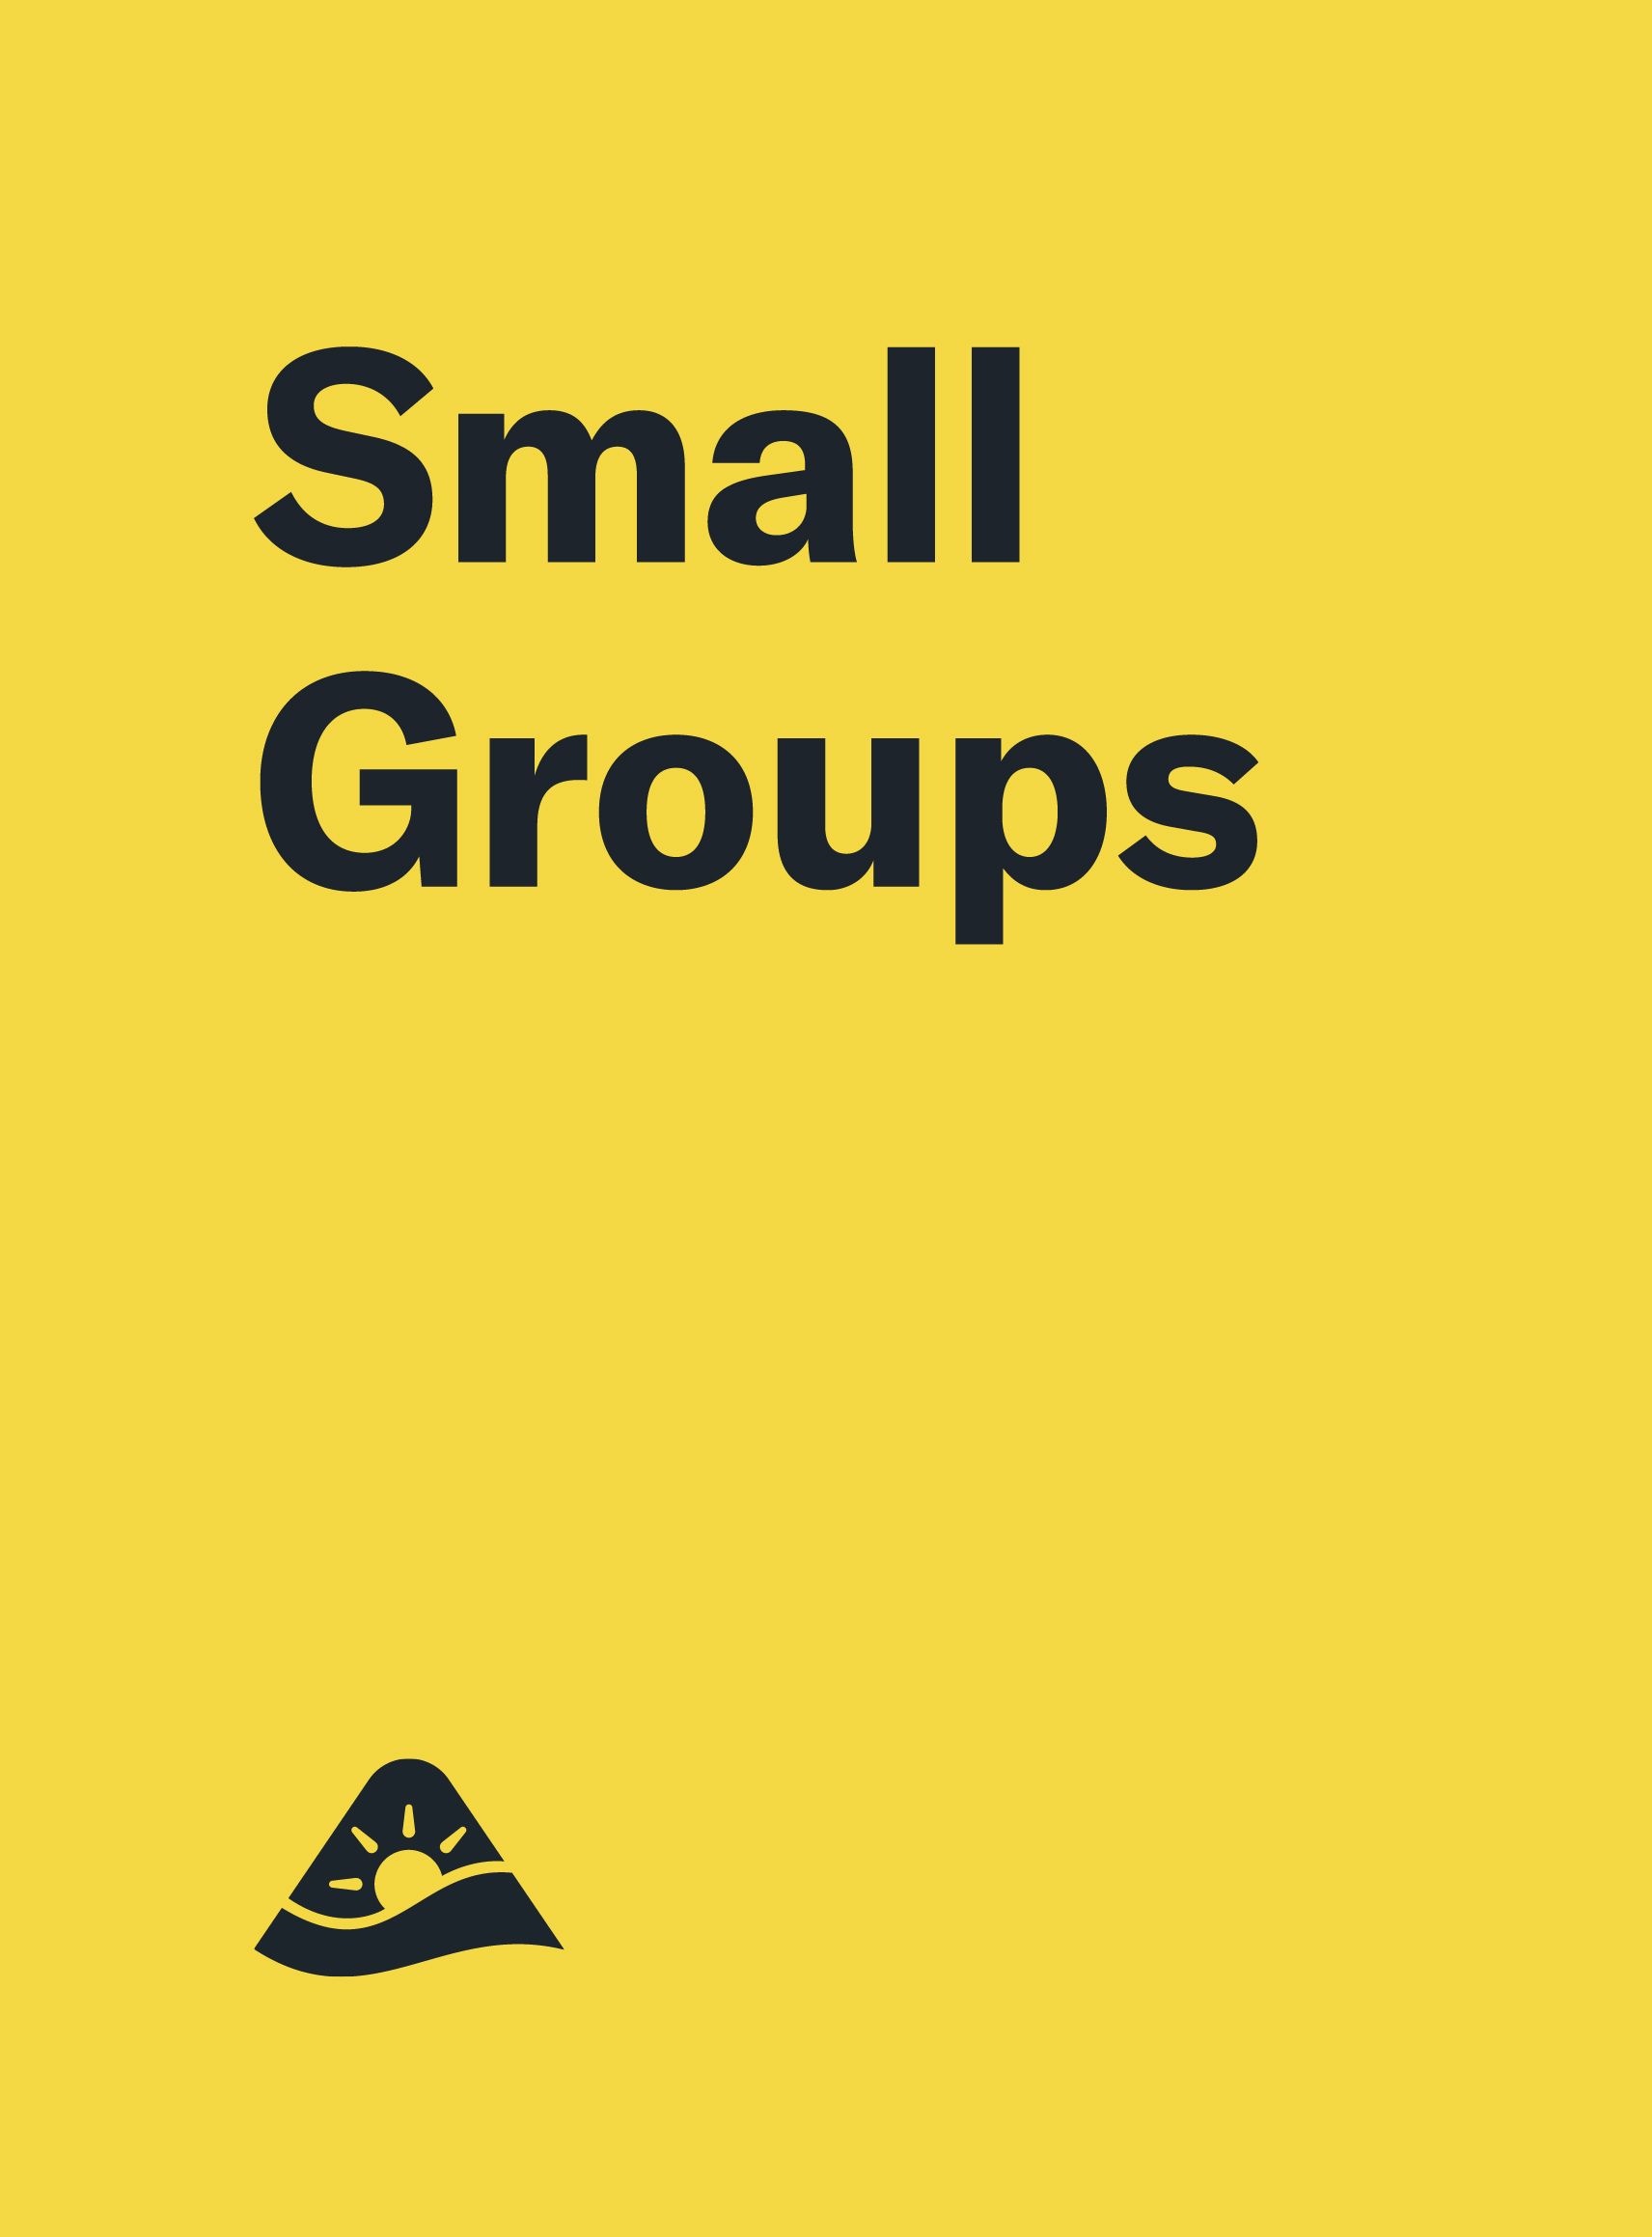 Lead a Small Group